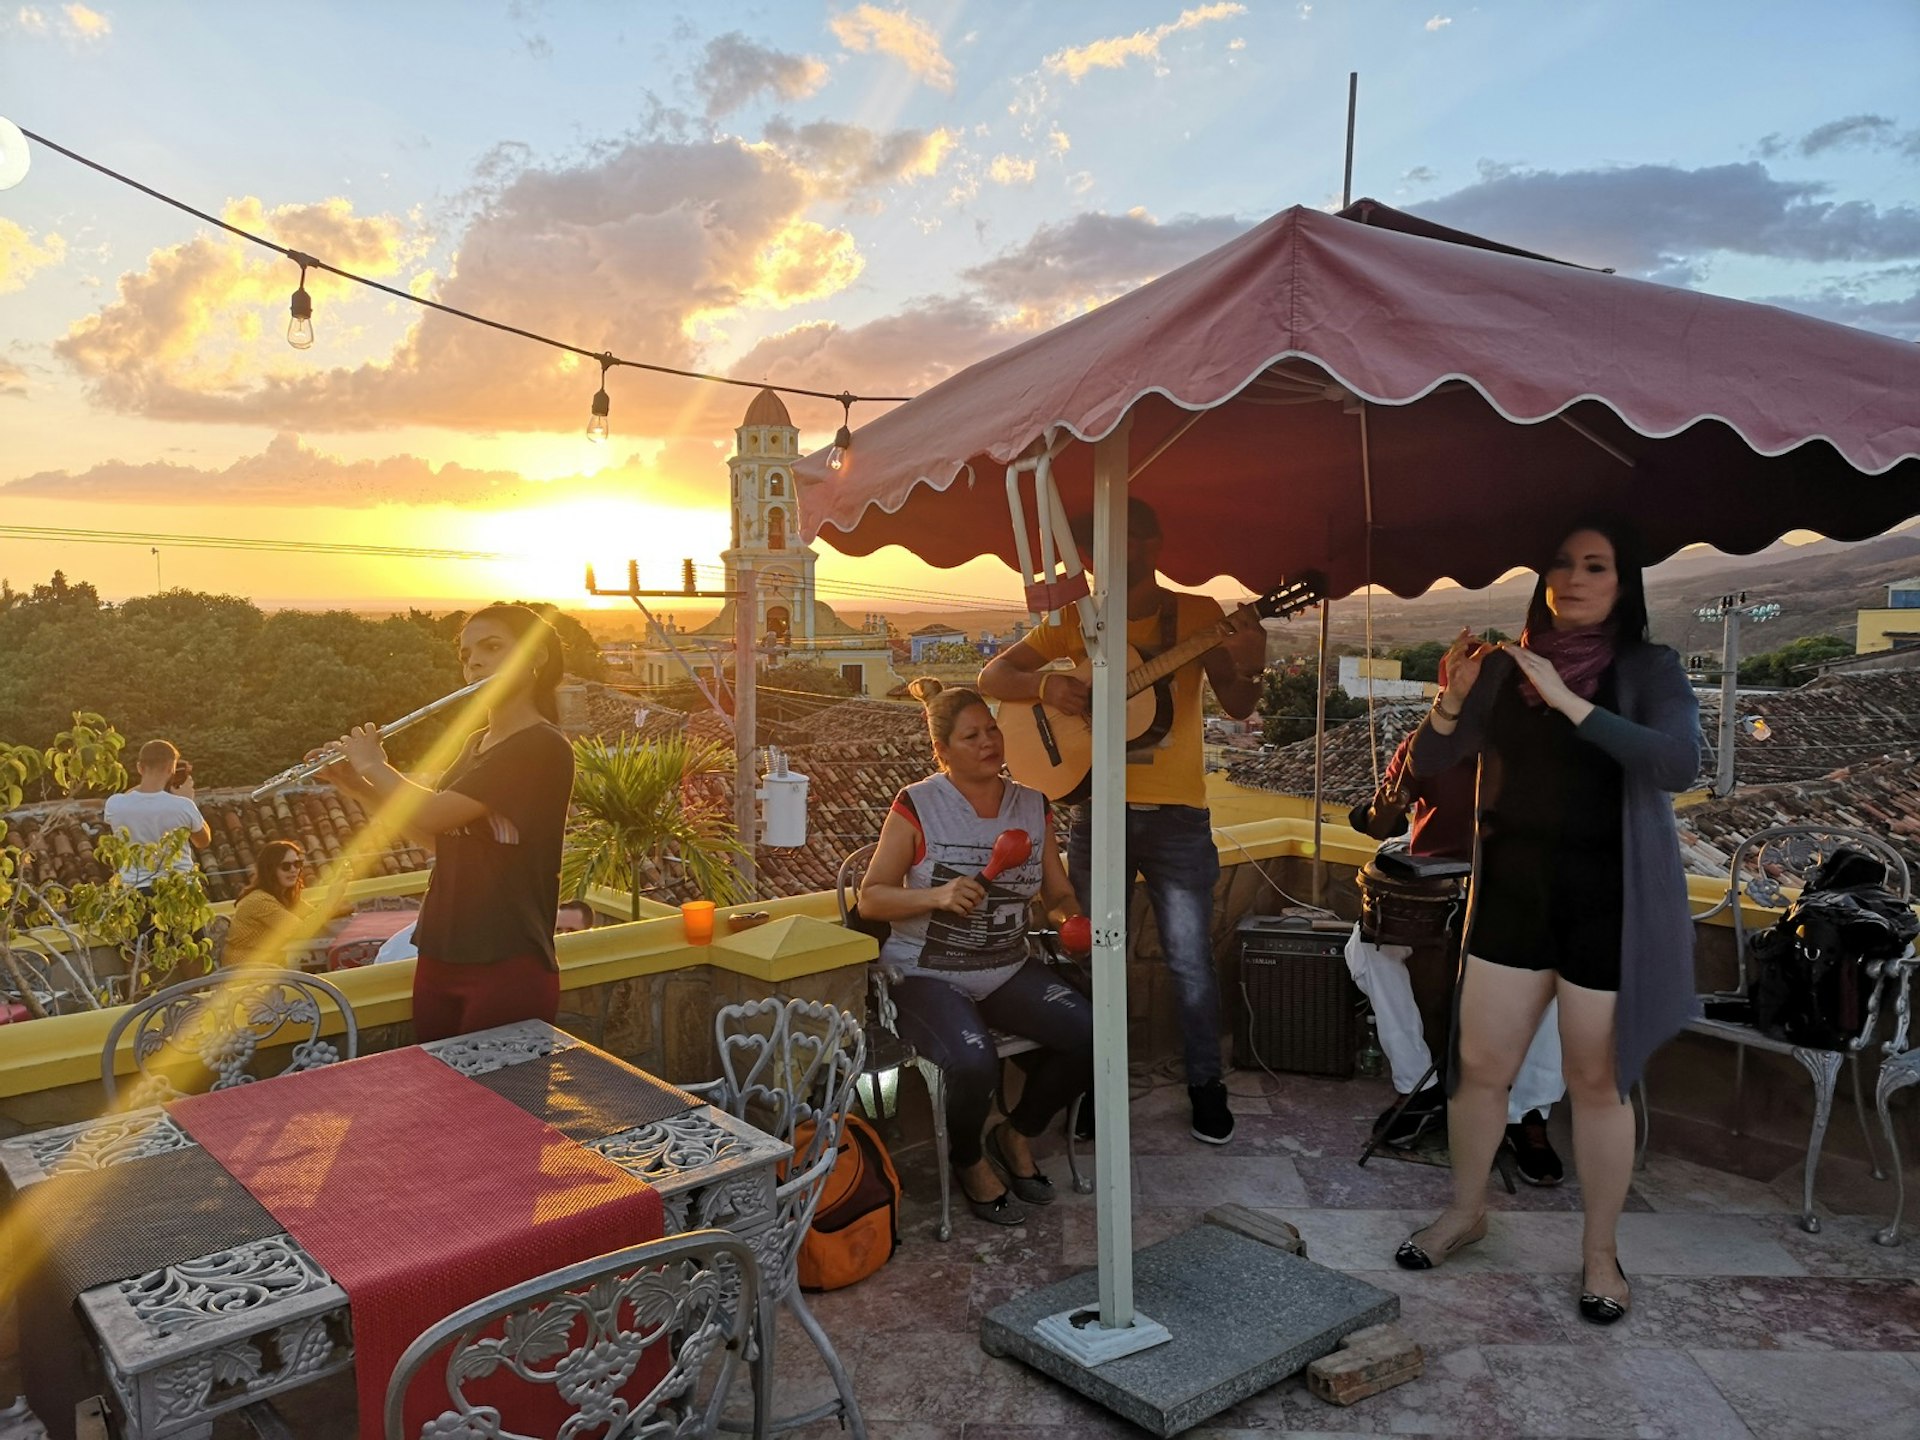 Salsa band performs on a rooftop cafe as the sun sets in Trinidad, Cuba 